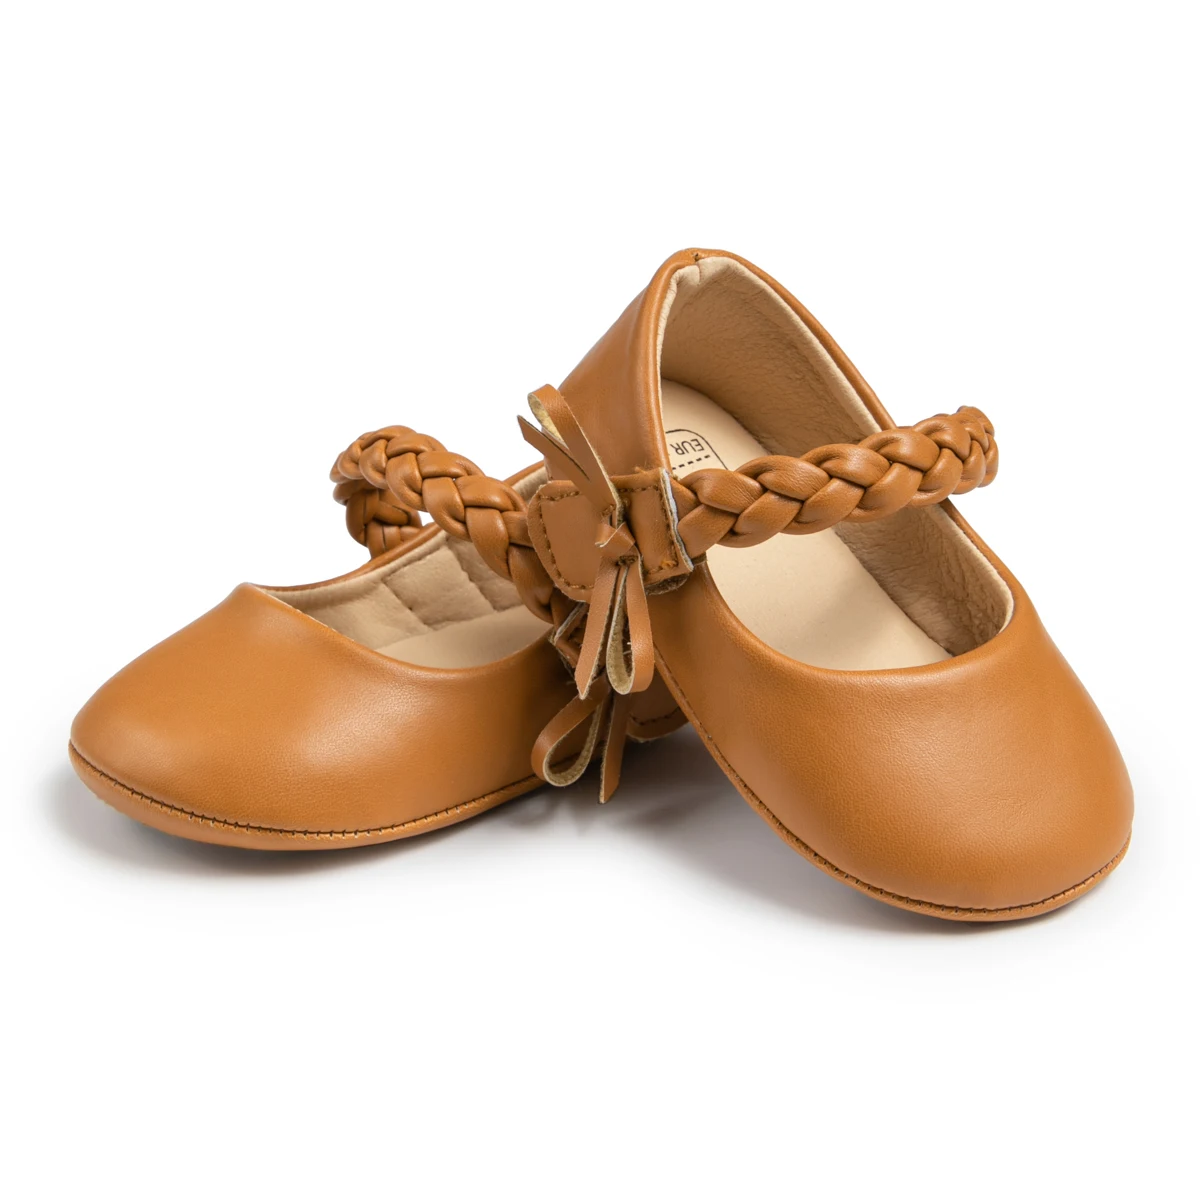 New Arrival Fashional Infant Outdoor Princess Bowknot Wedding Rubber Soft Sole PU Leather Baby Girl shoes